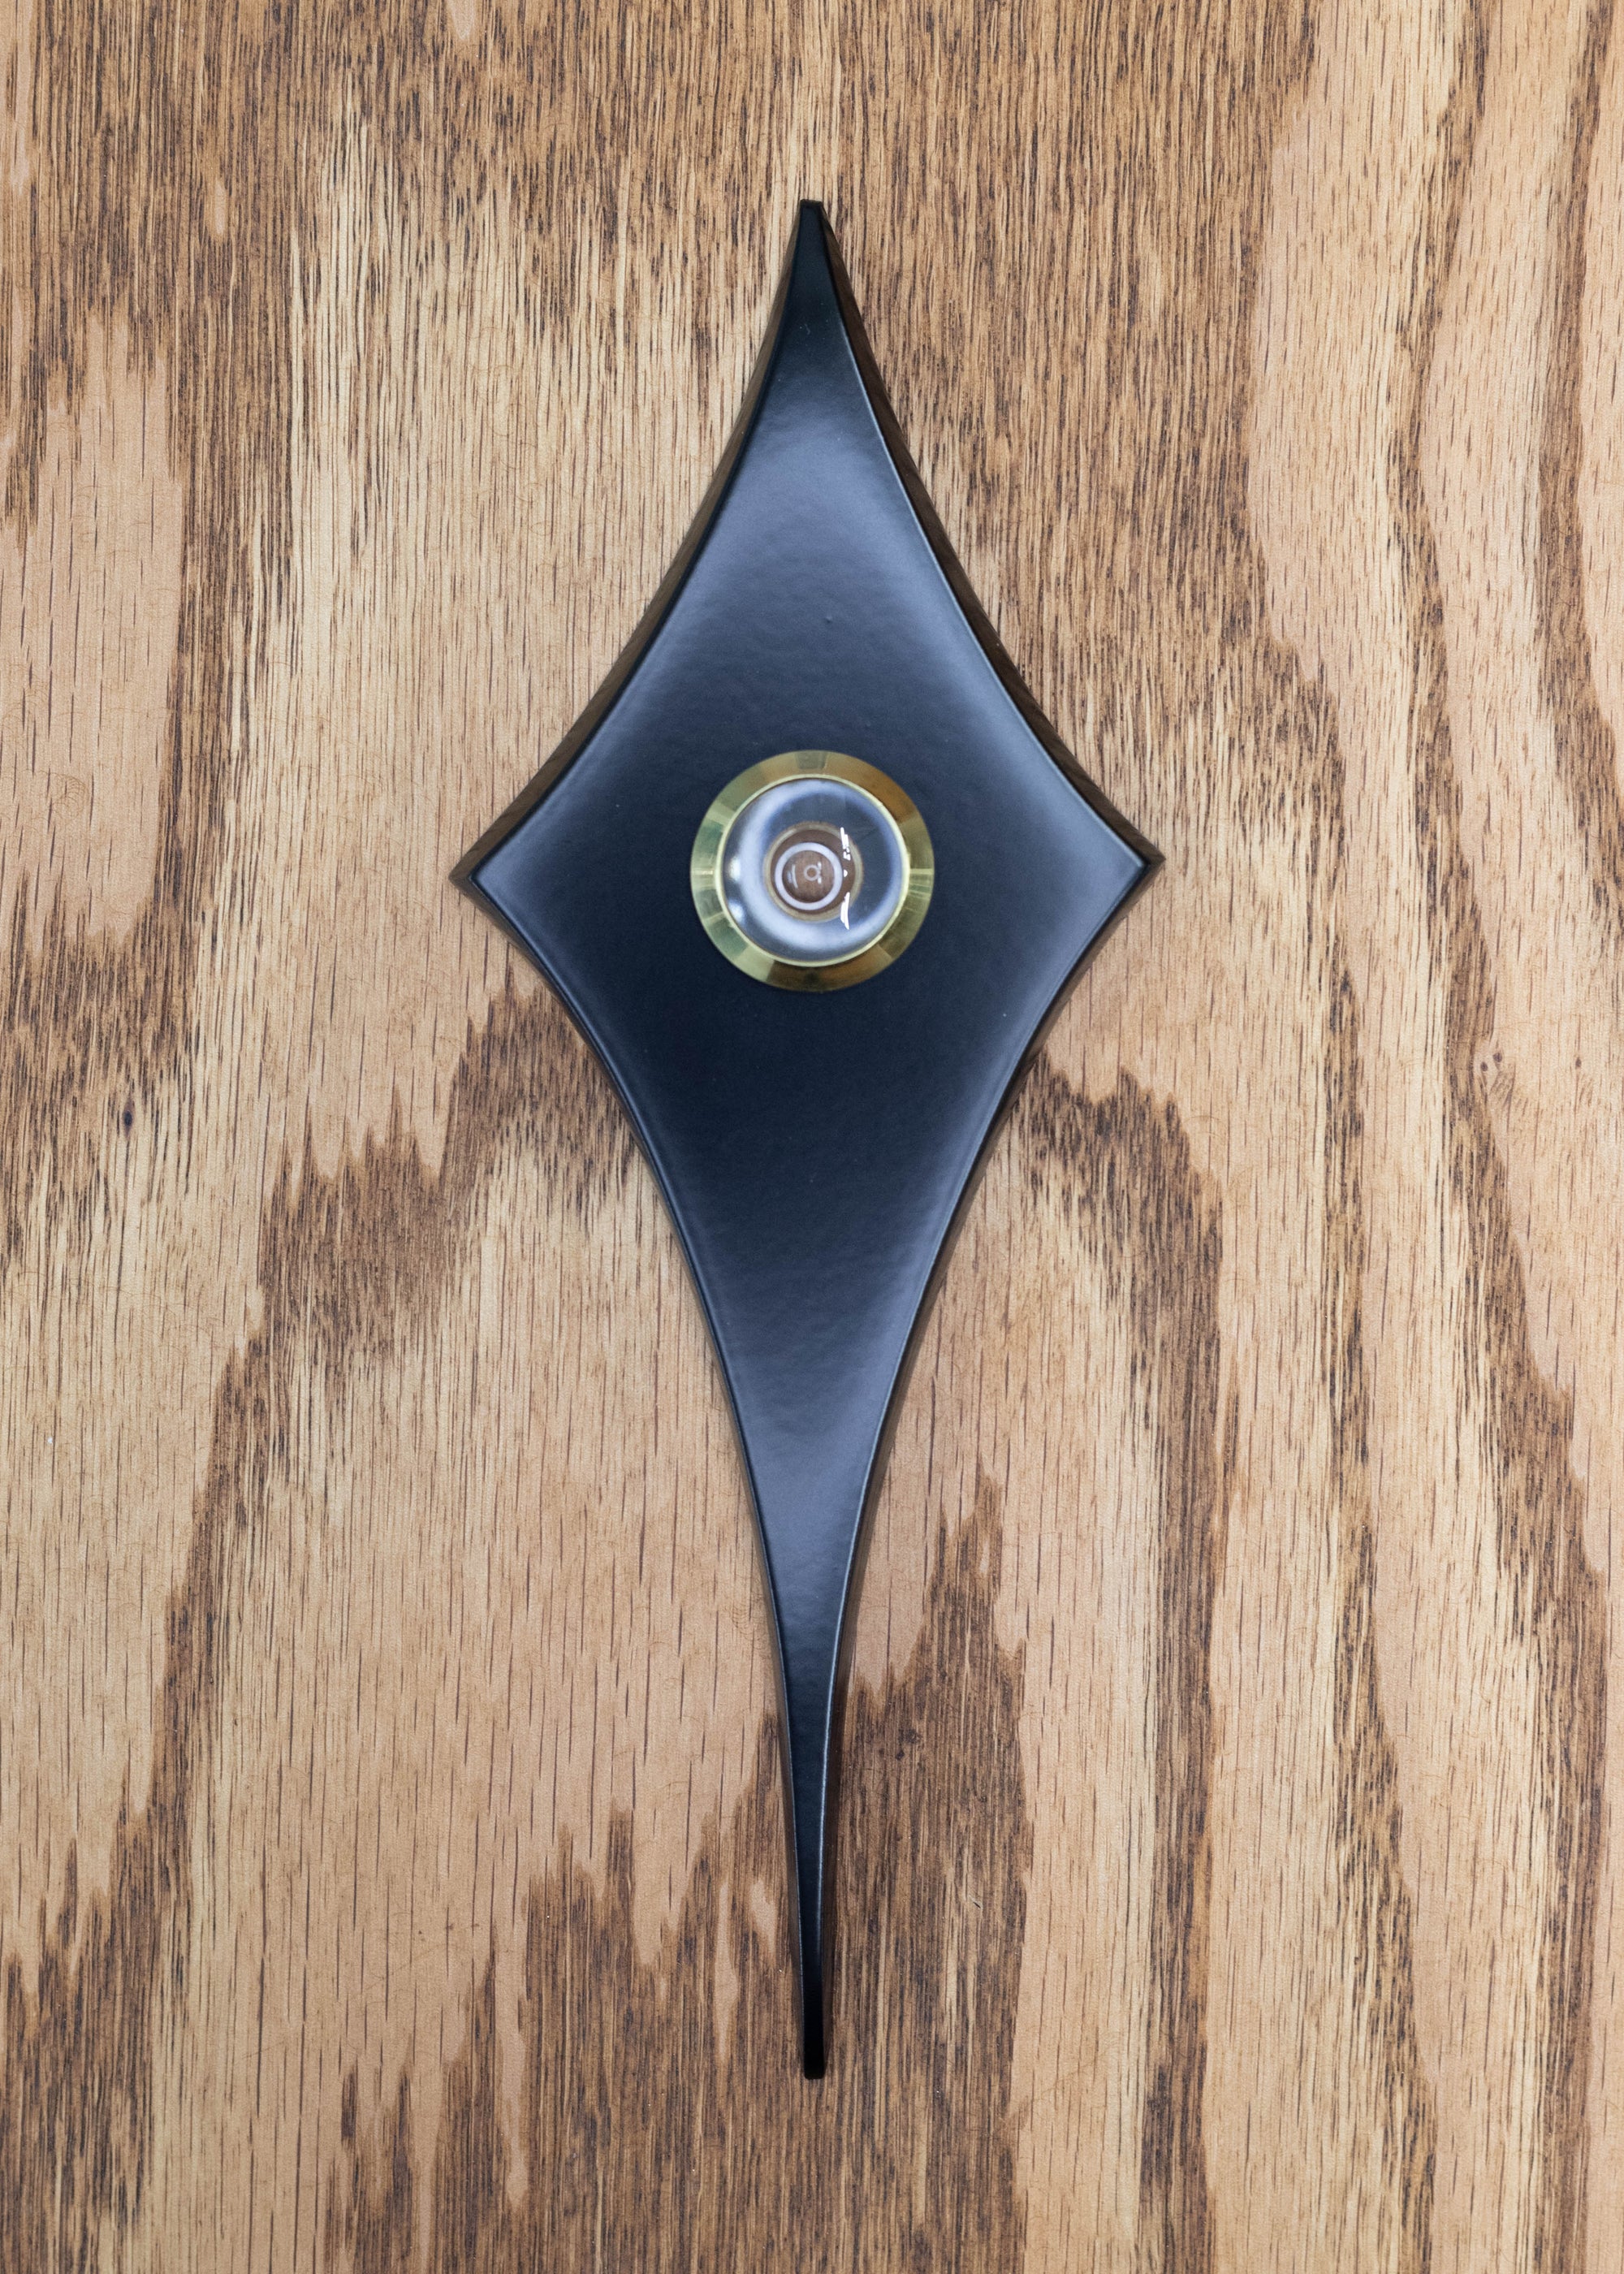 Matte black coating with a gold rimmed peephole viewer in the center.